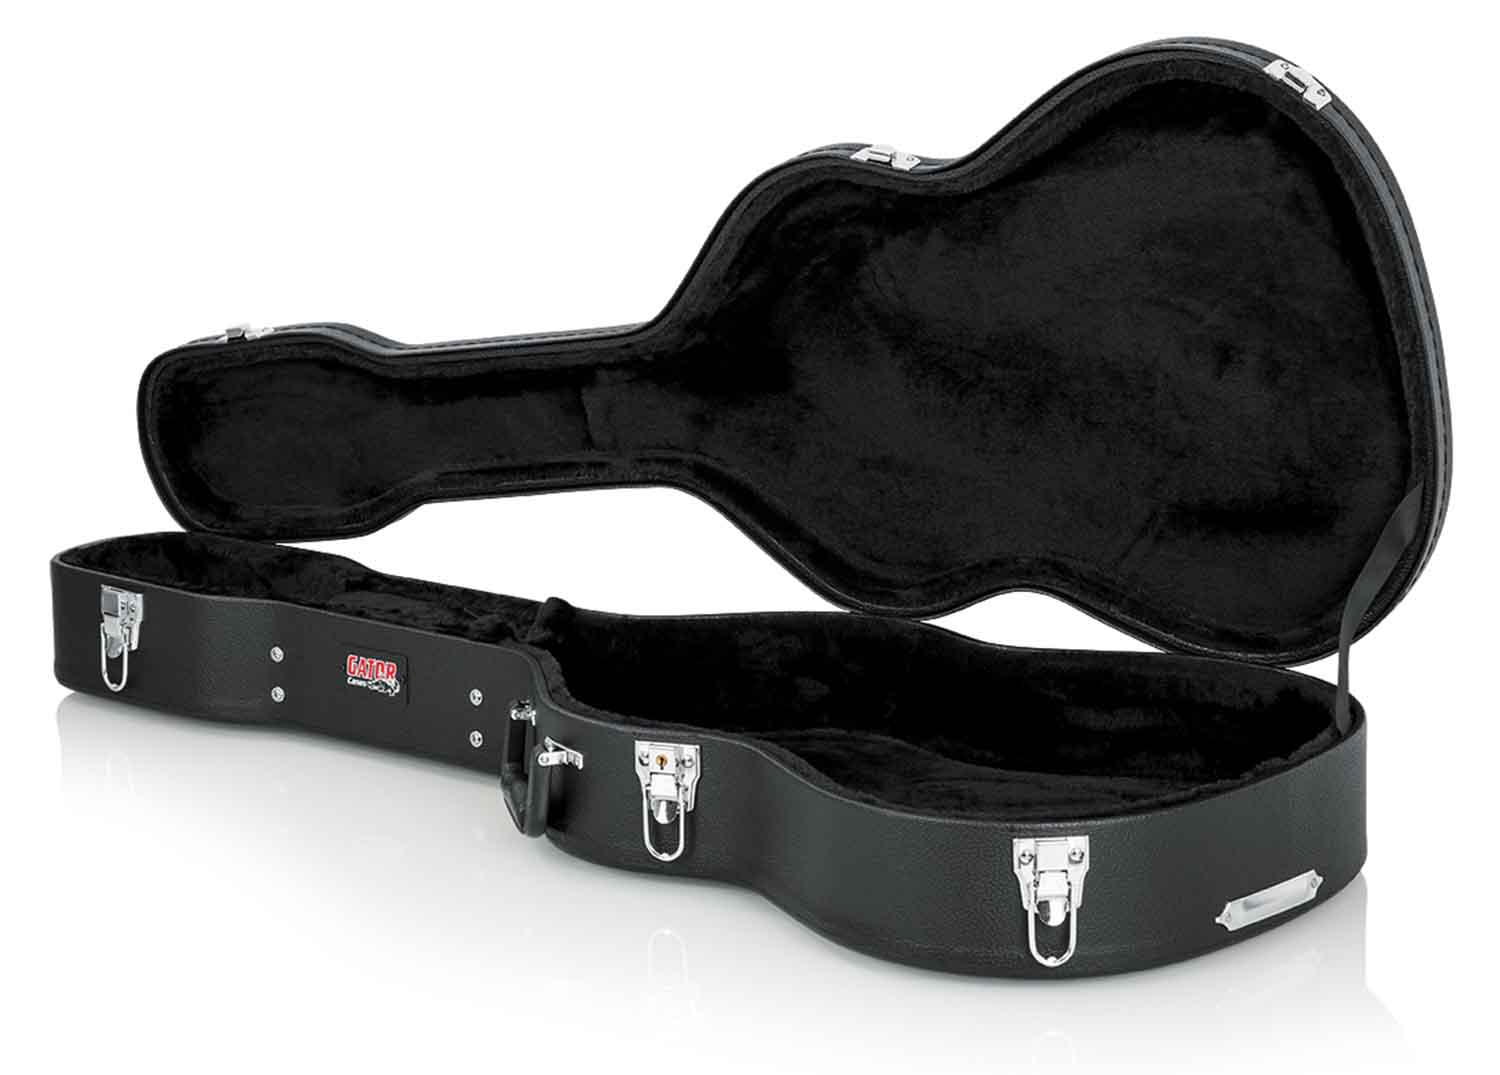 Gator Cases GWE-CLASSIC Hard-Shell Wood Case for Classical Guitars - Black - Hollywood DJ